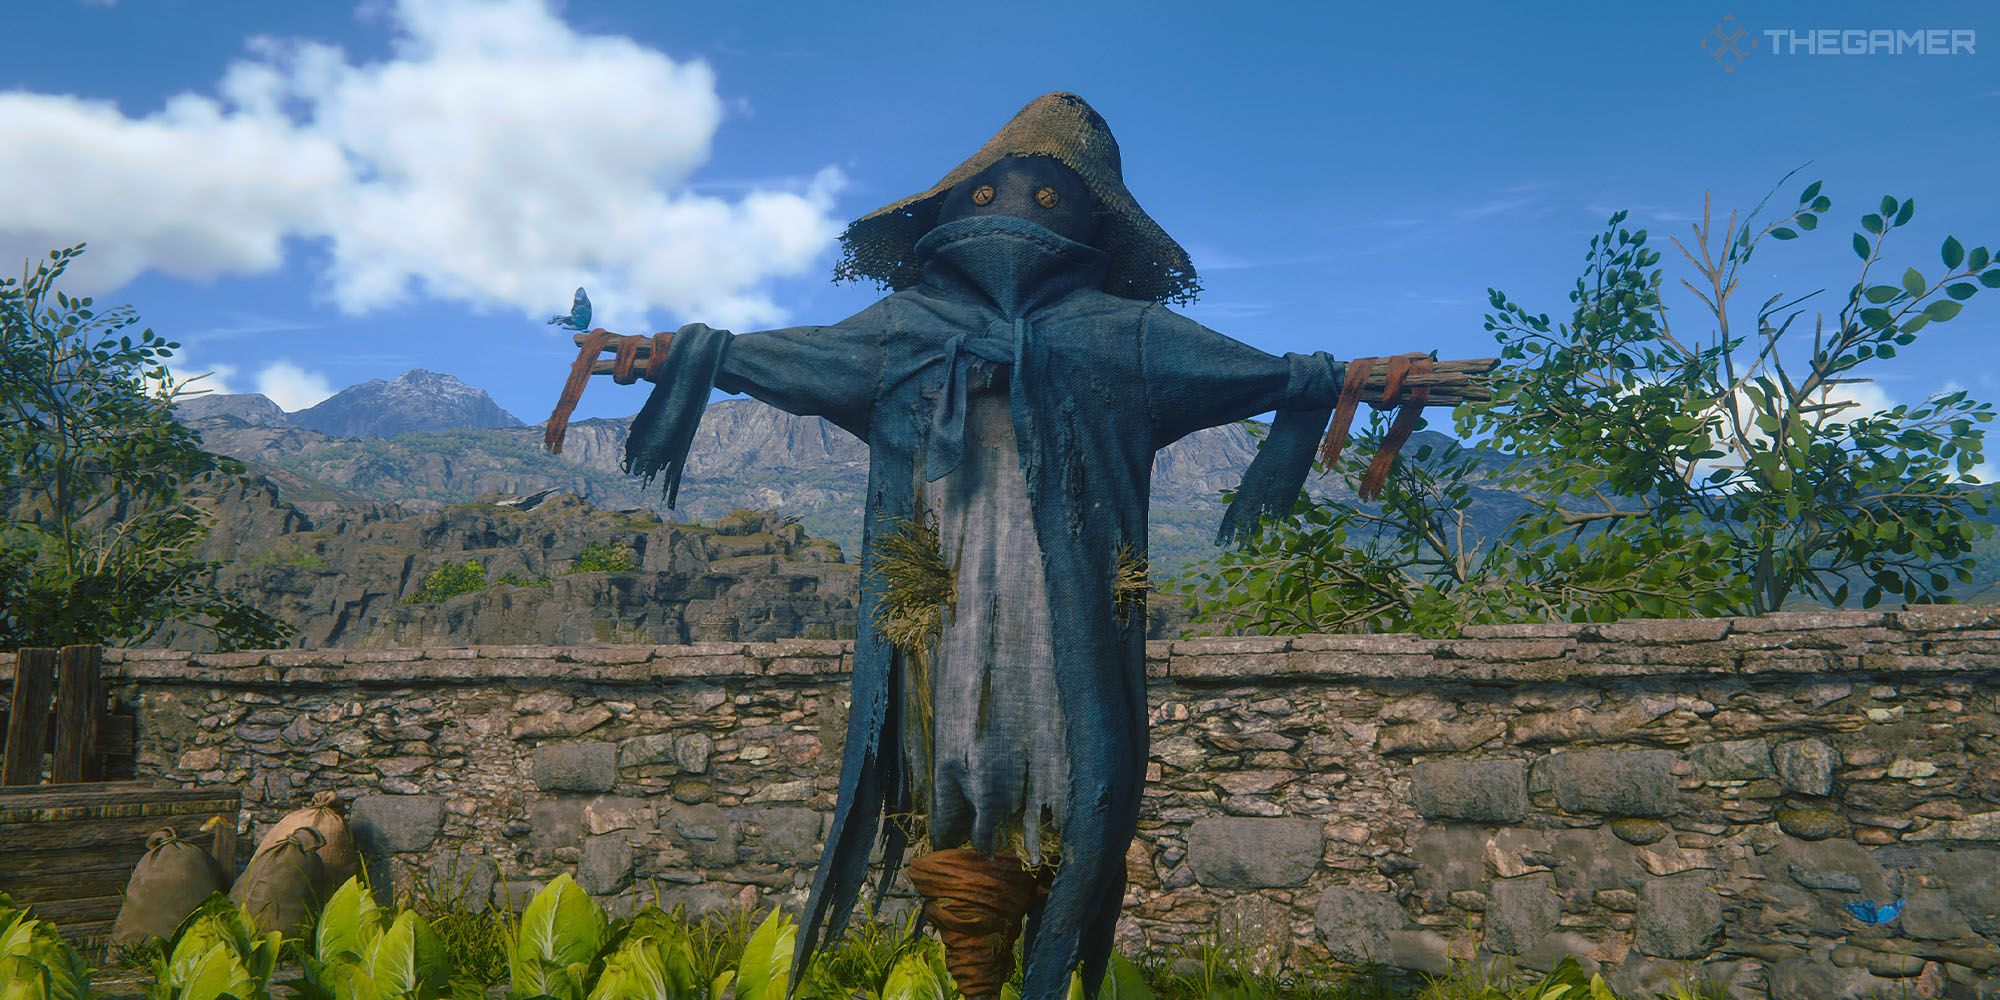 Final Fantasy 16 screenshot of a scarecrow that looks like Vivi the Black Mage from FF9 